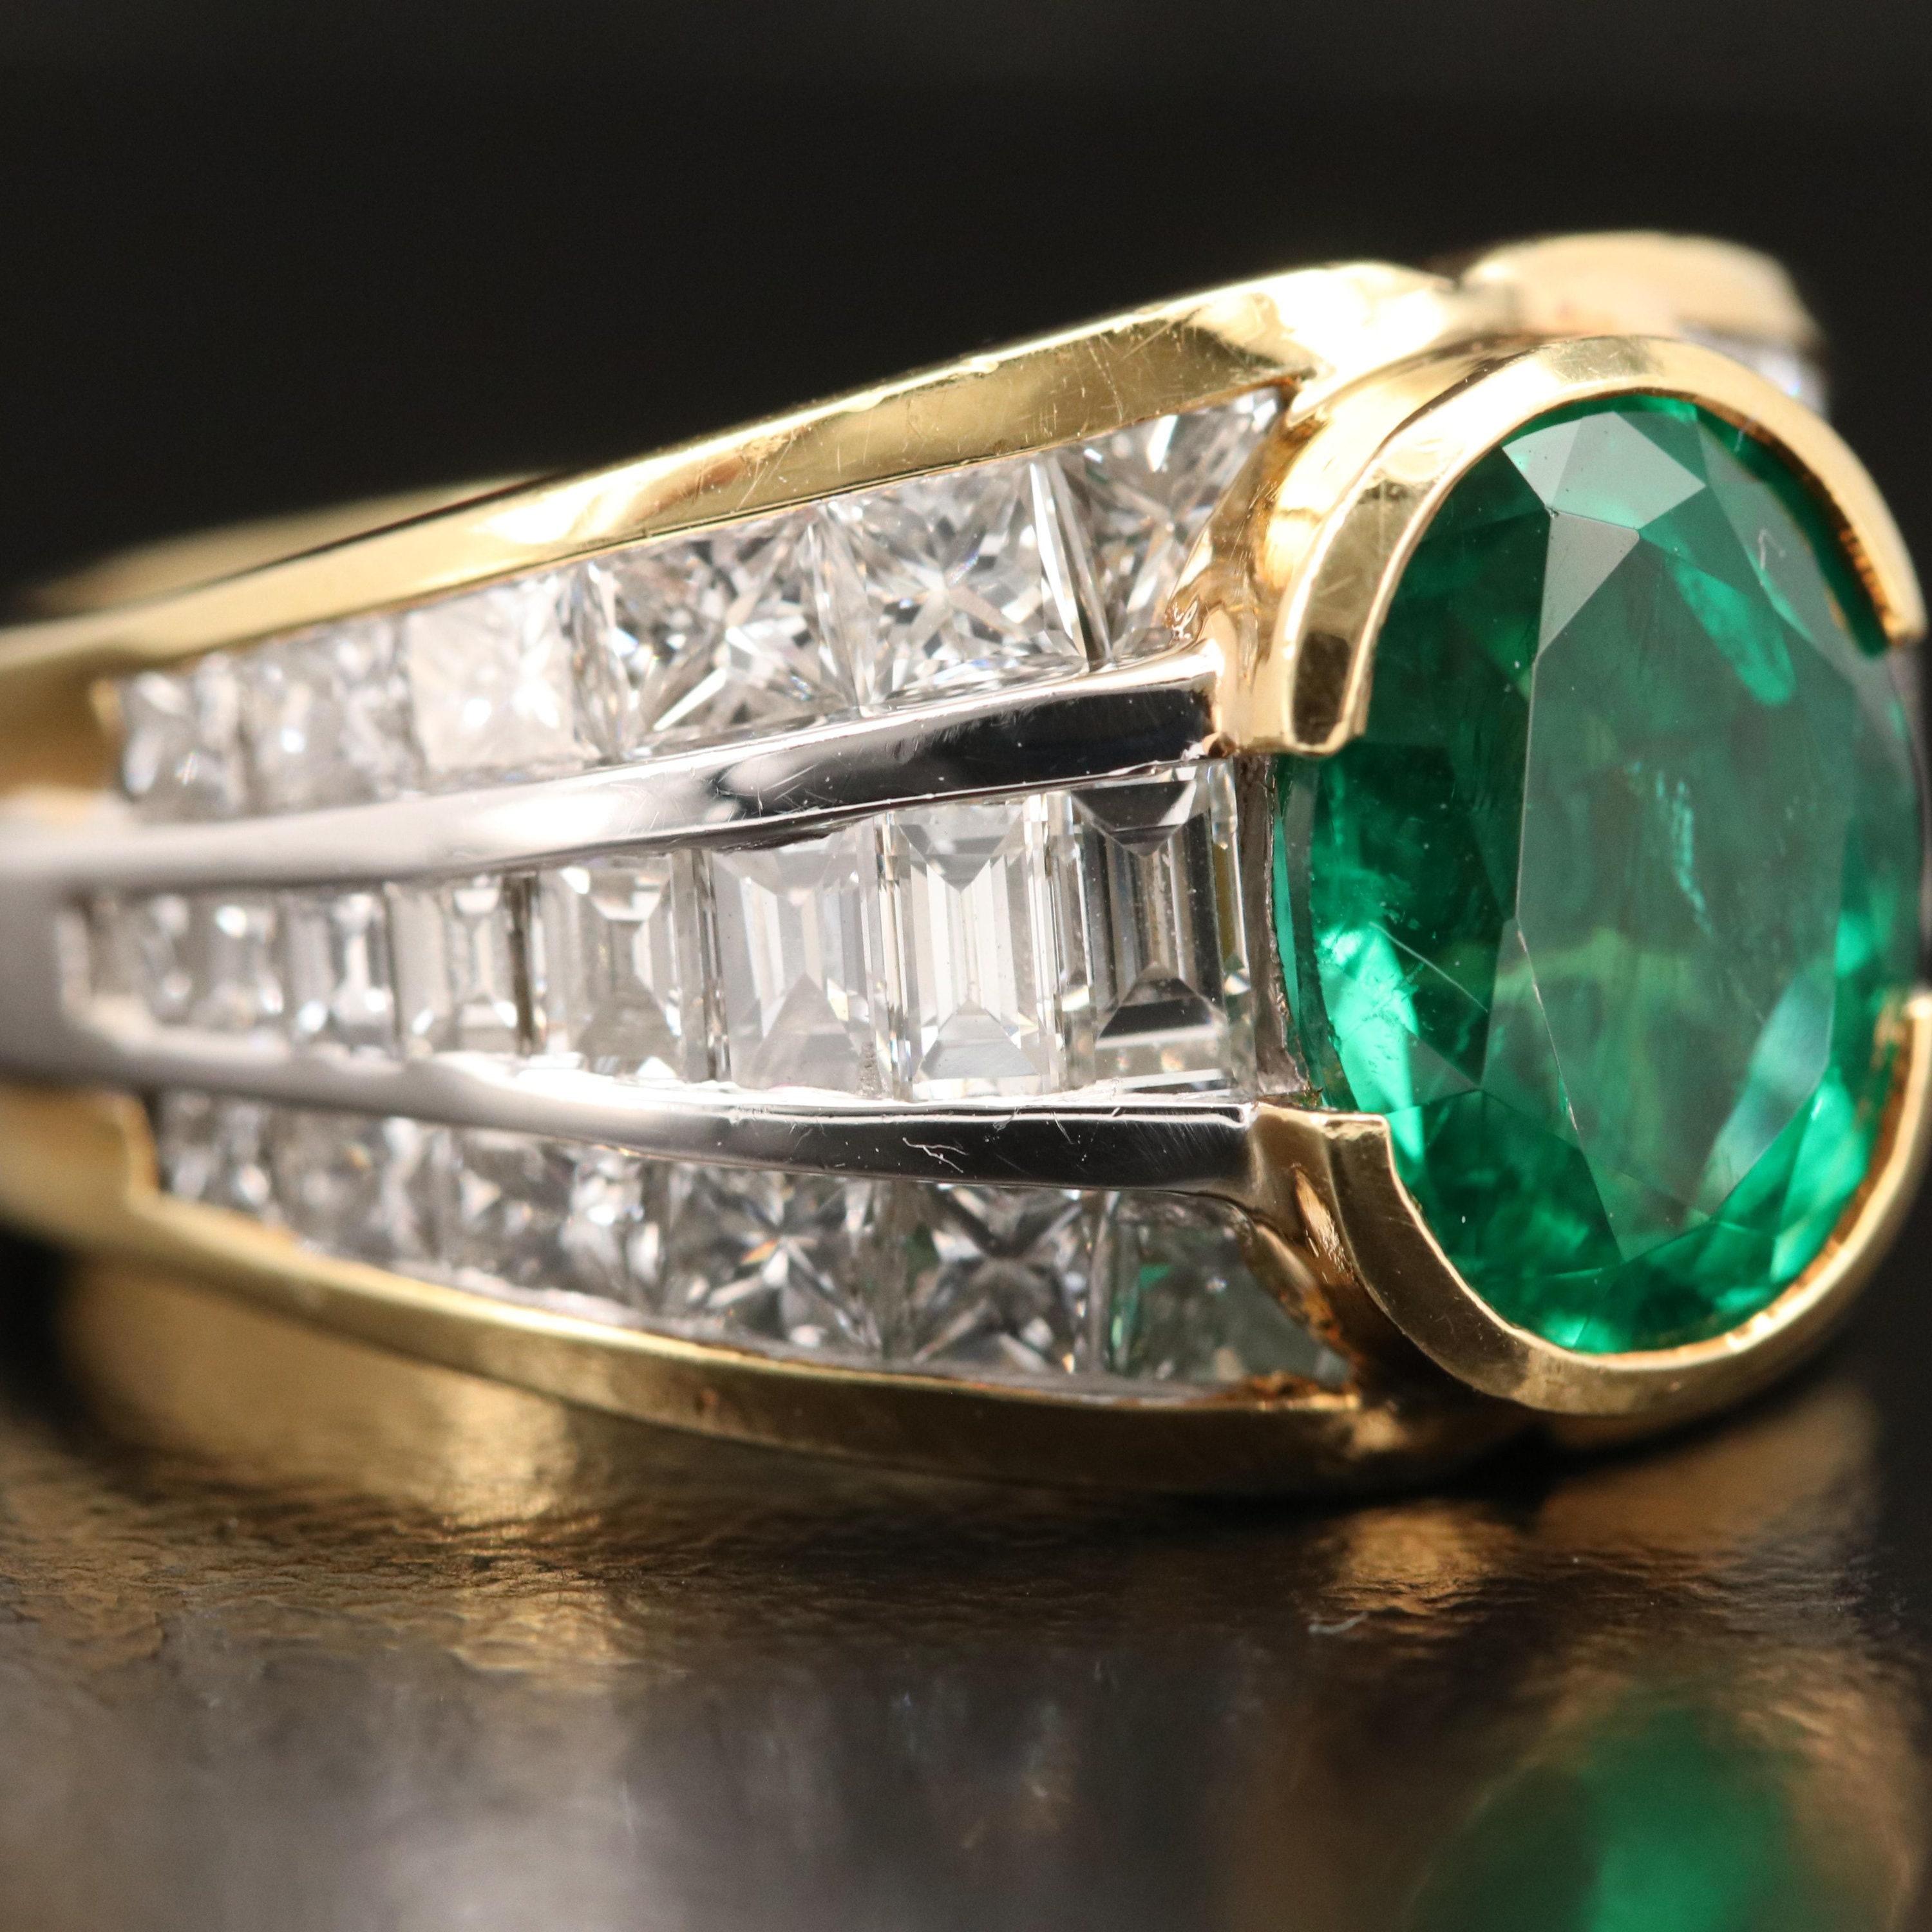 For Sale:  2.5 Carat Oval Cut Emerald Engagement Ring, Natural Emerald Diamond Wedding Band 2